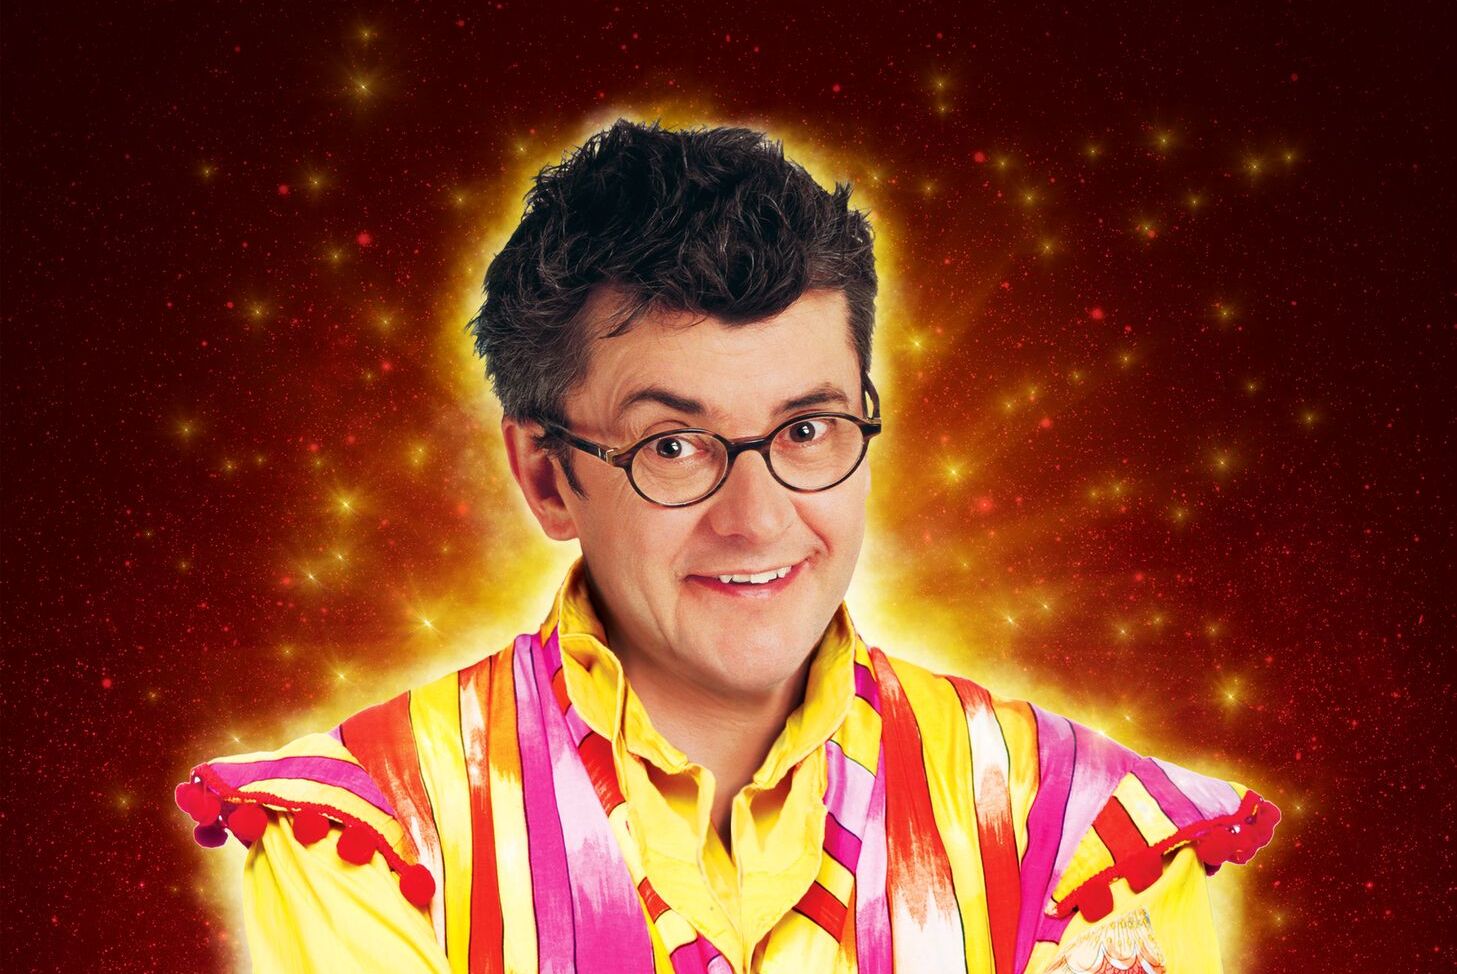 Joe Pasquale is excellent as Aladdin's brother Wishy Washy